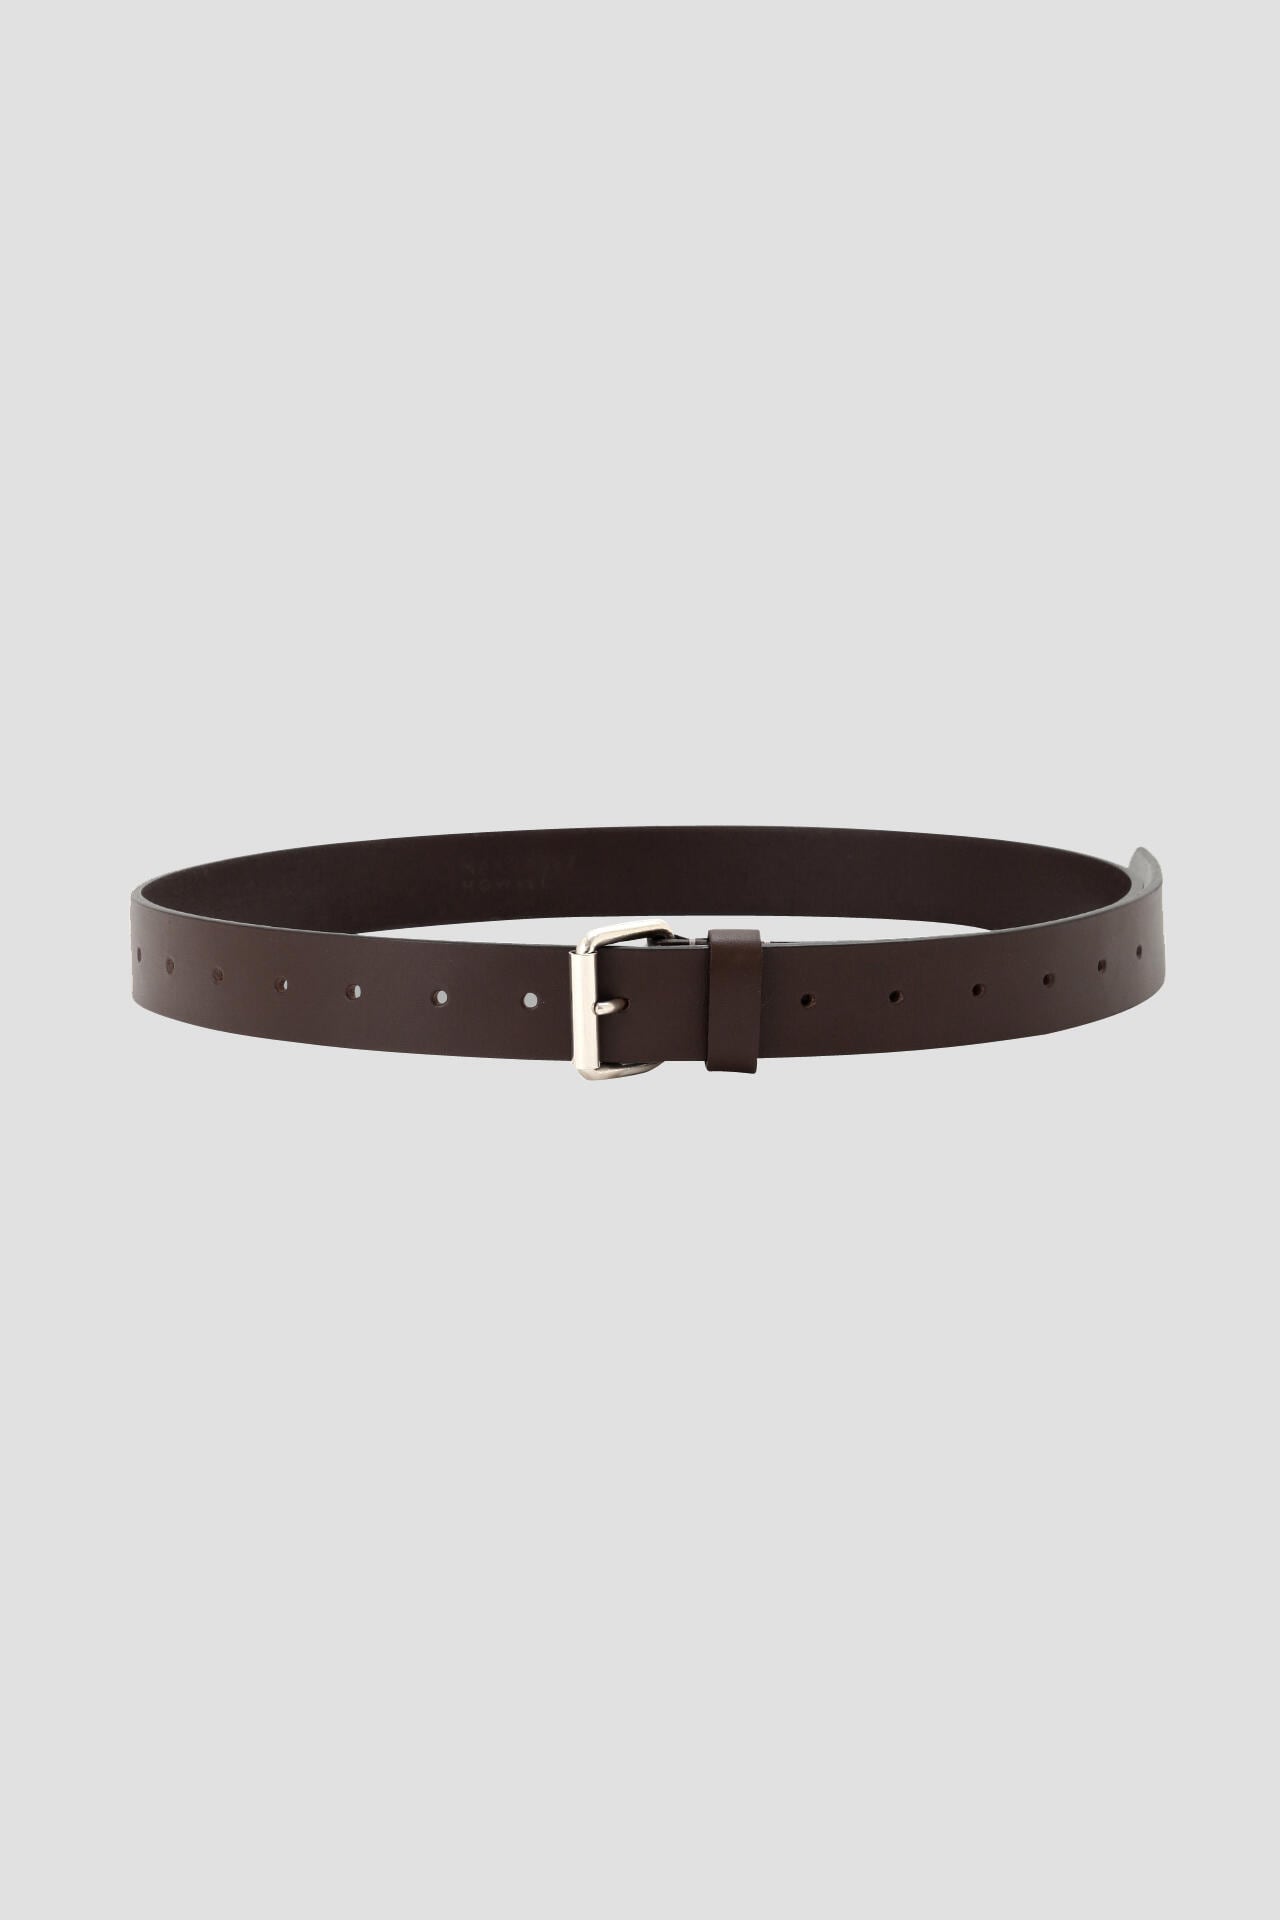 OILED LEATHER LONG BELT5